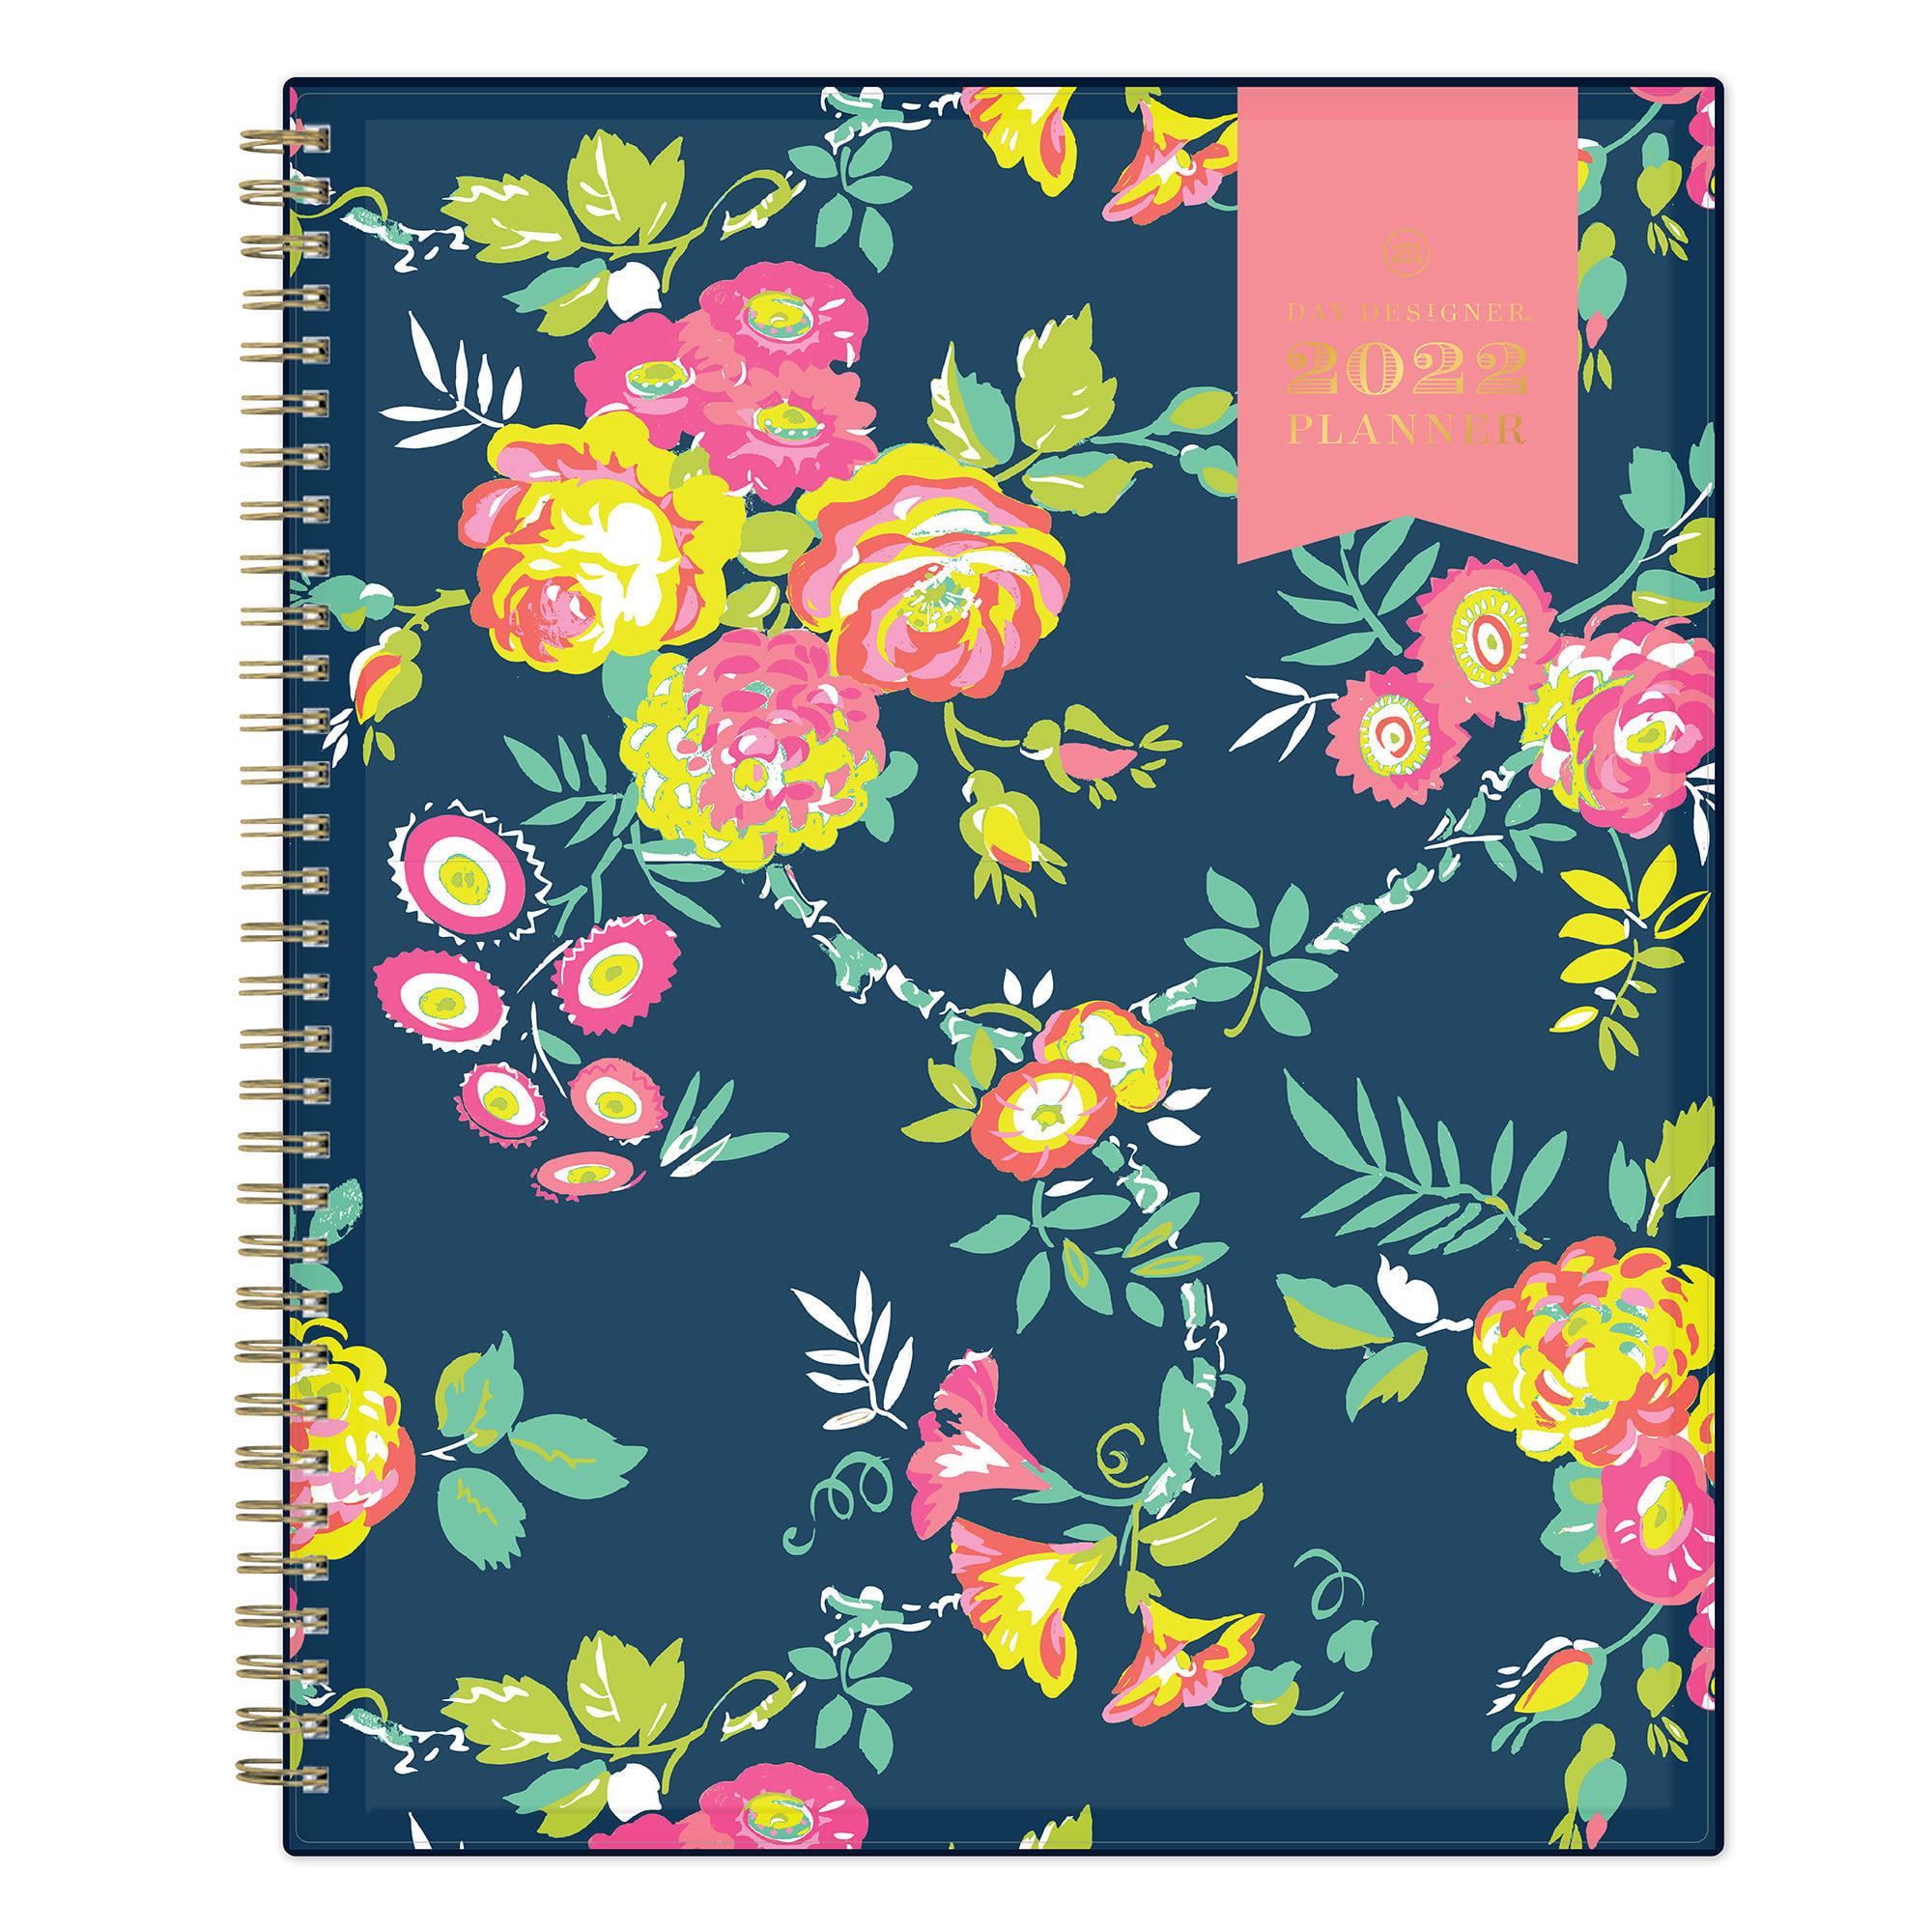 8.5 x 11 Twin-Wire Binding Peyton Navy Day Designer for Blue Sky 2020 Weekly & Monthly Planner Flexible Cover 